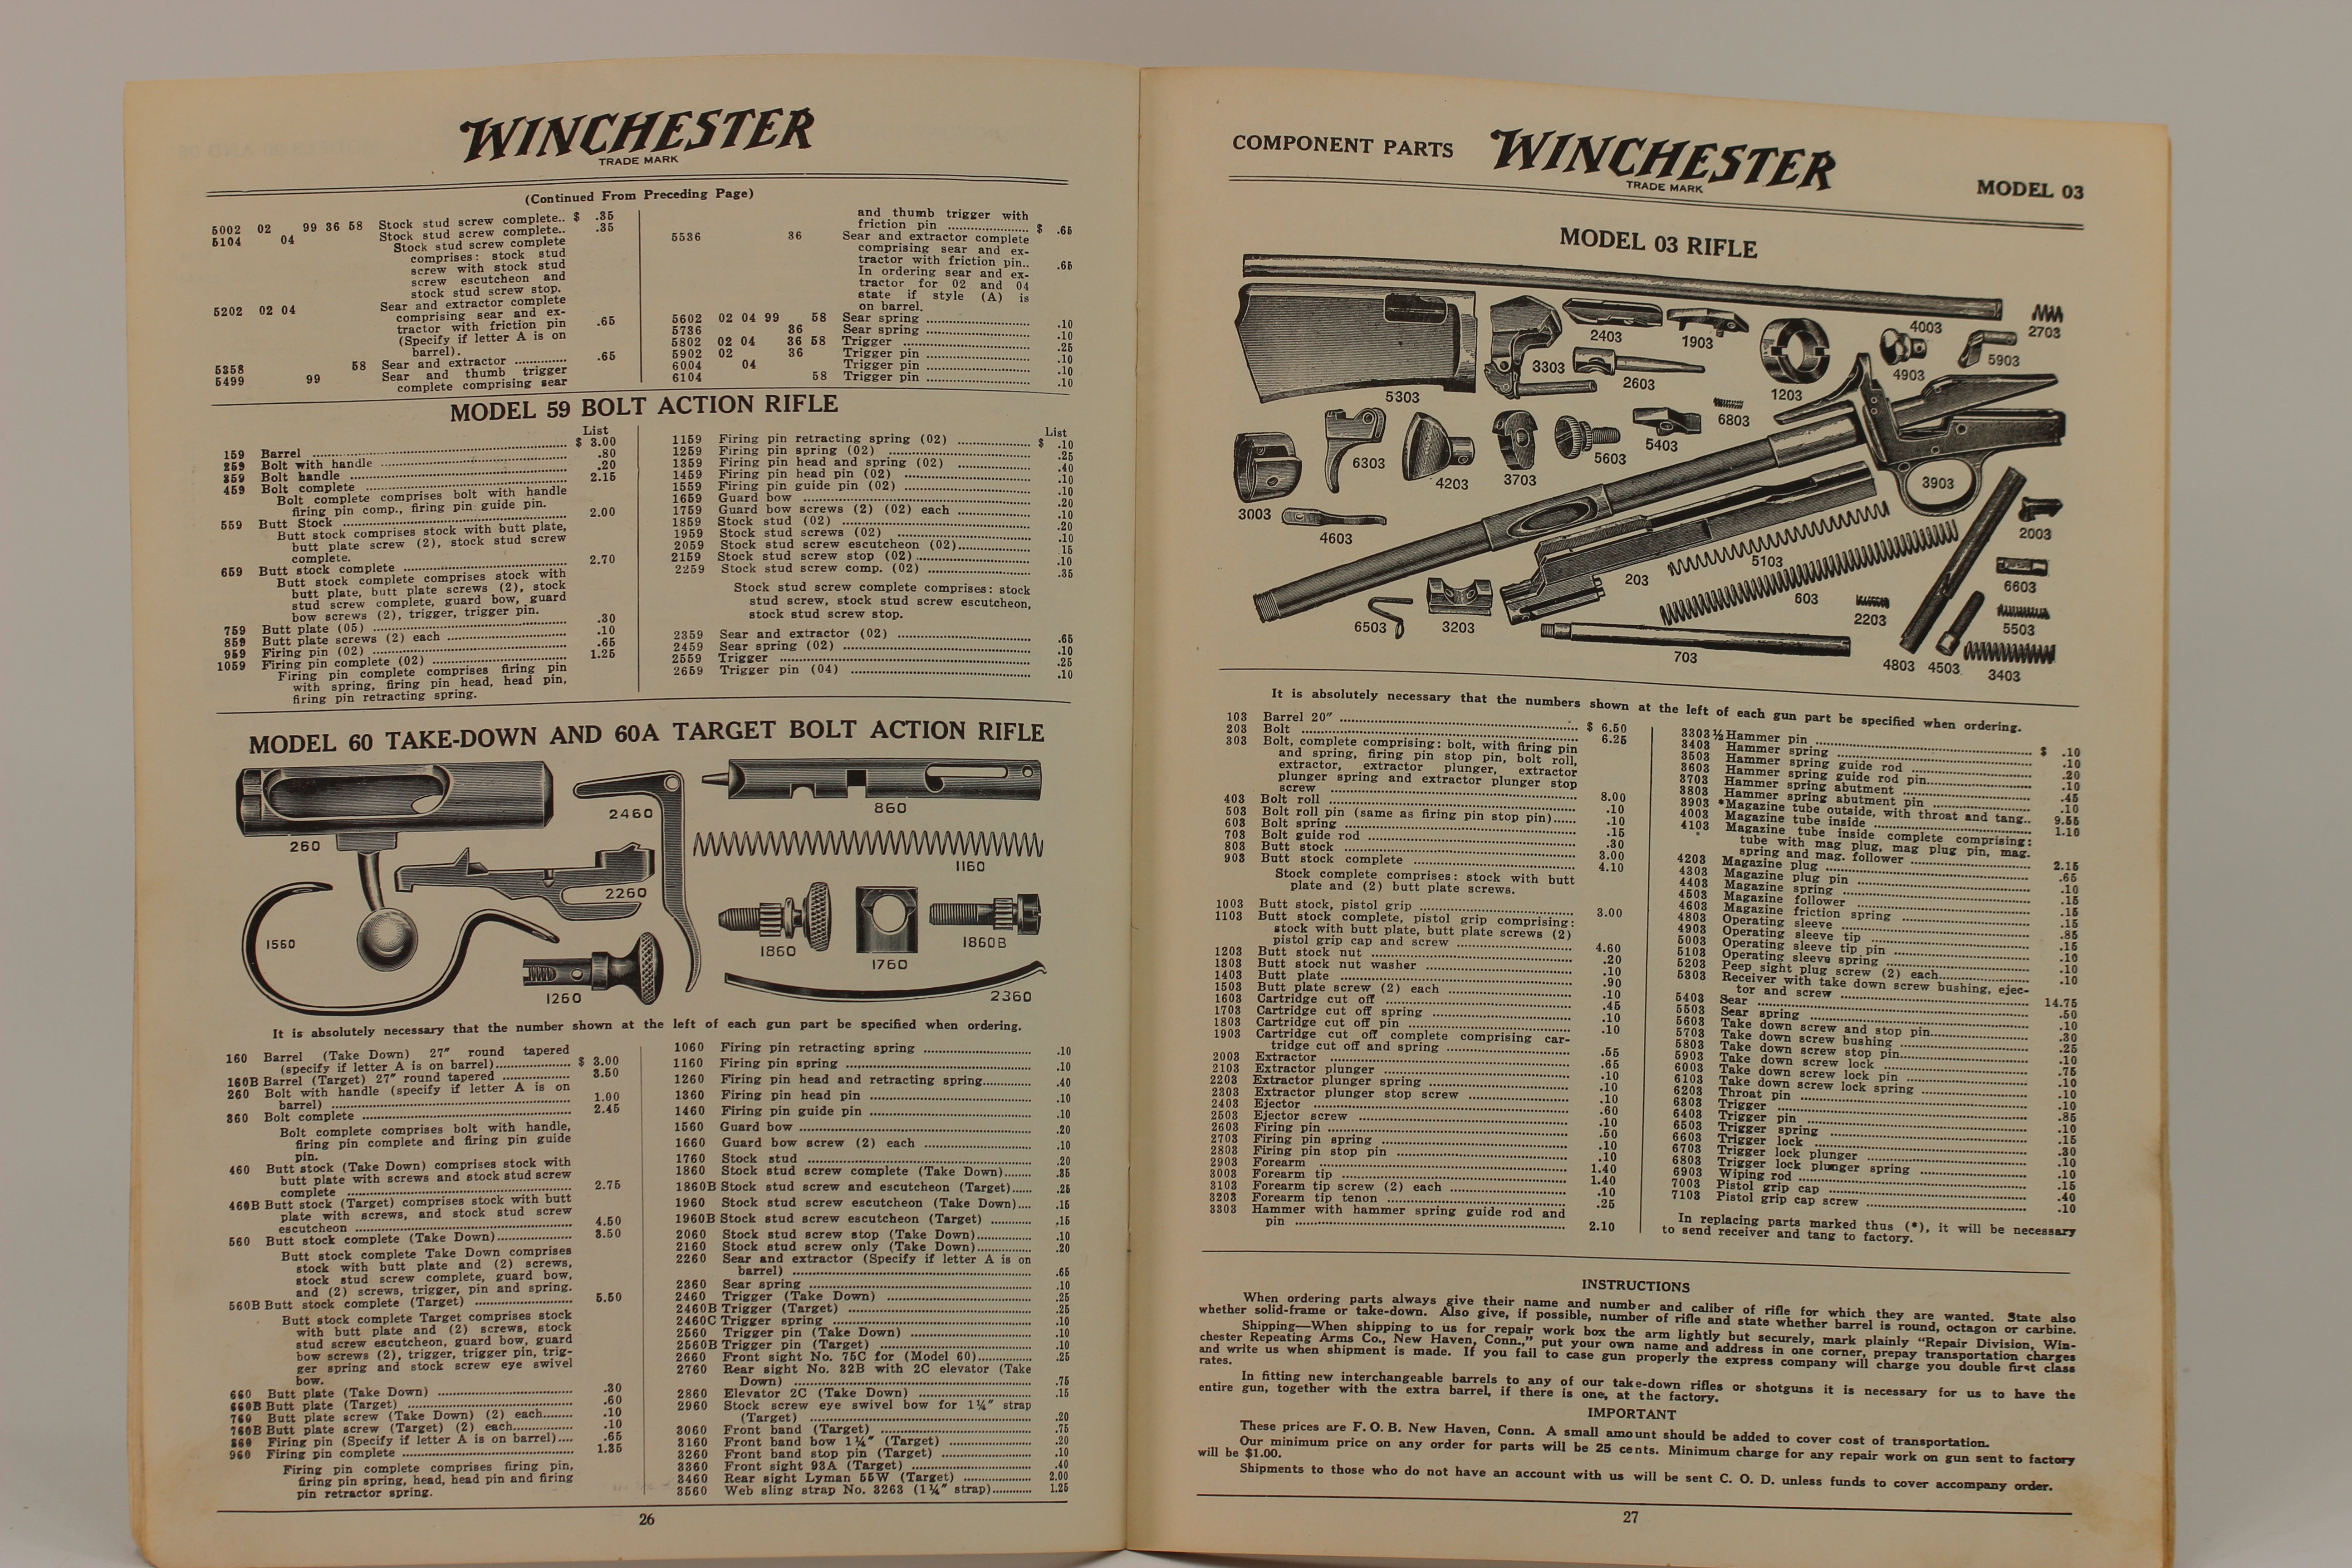 1936 Winchester Component Parts Catalog